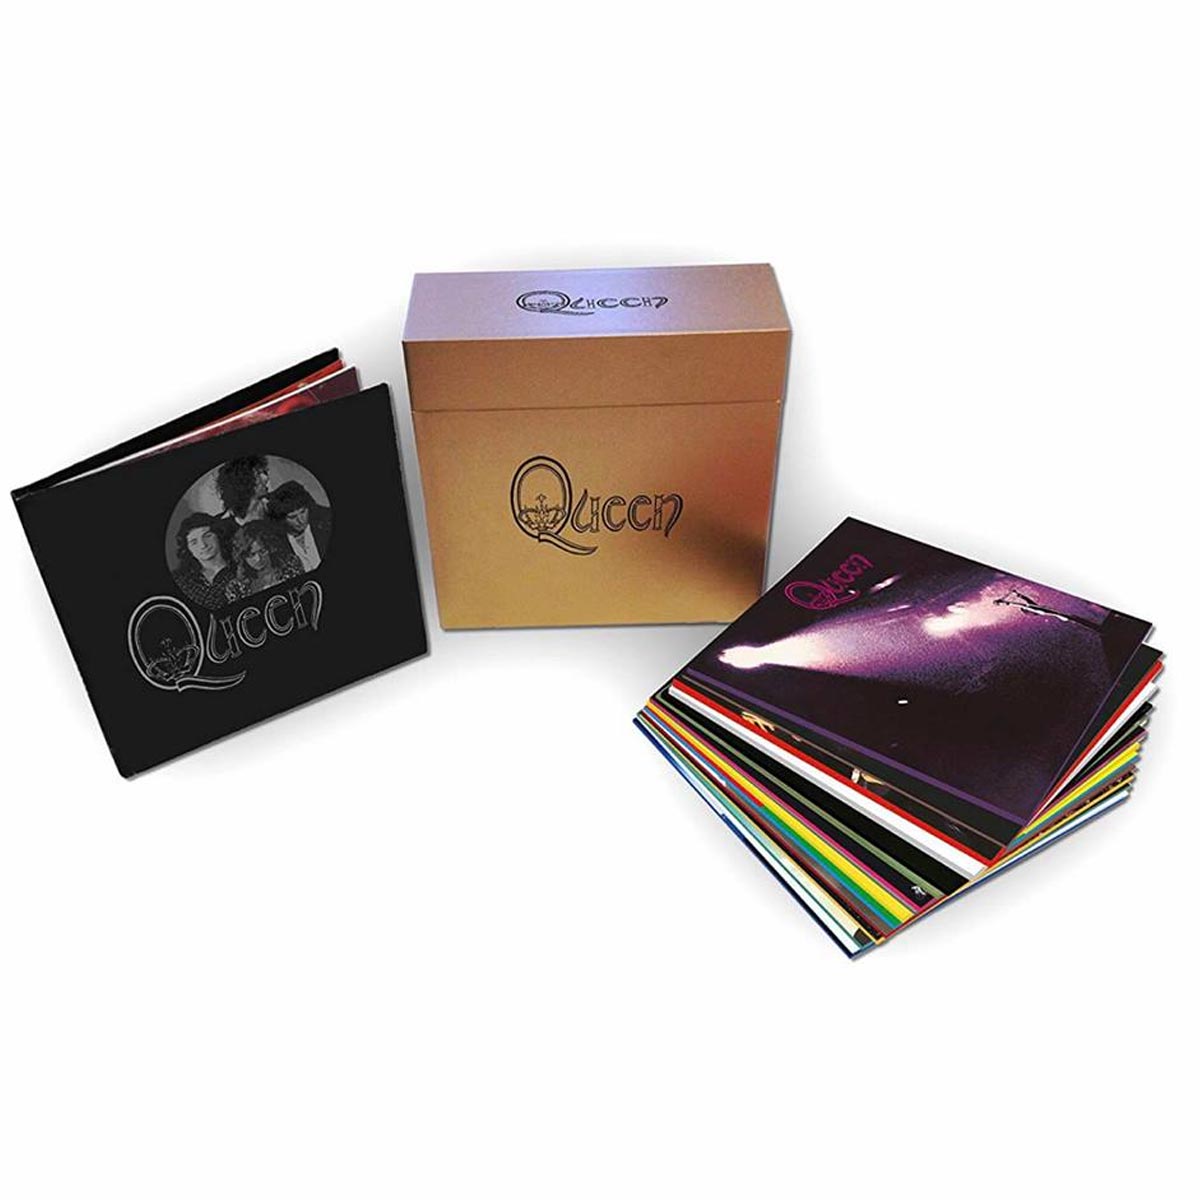 Queen "The Studio Collection" Limited Ediction